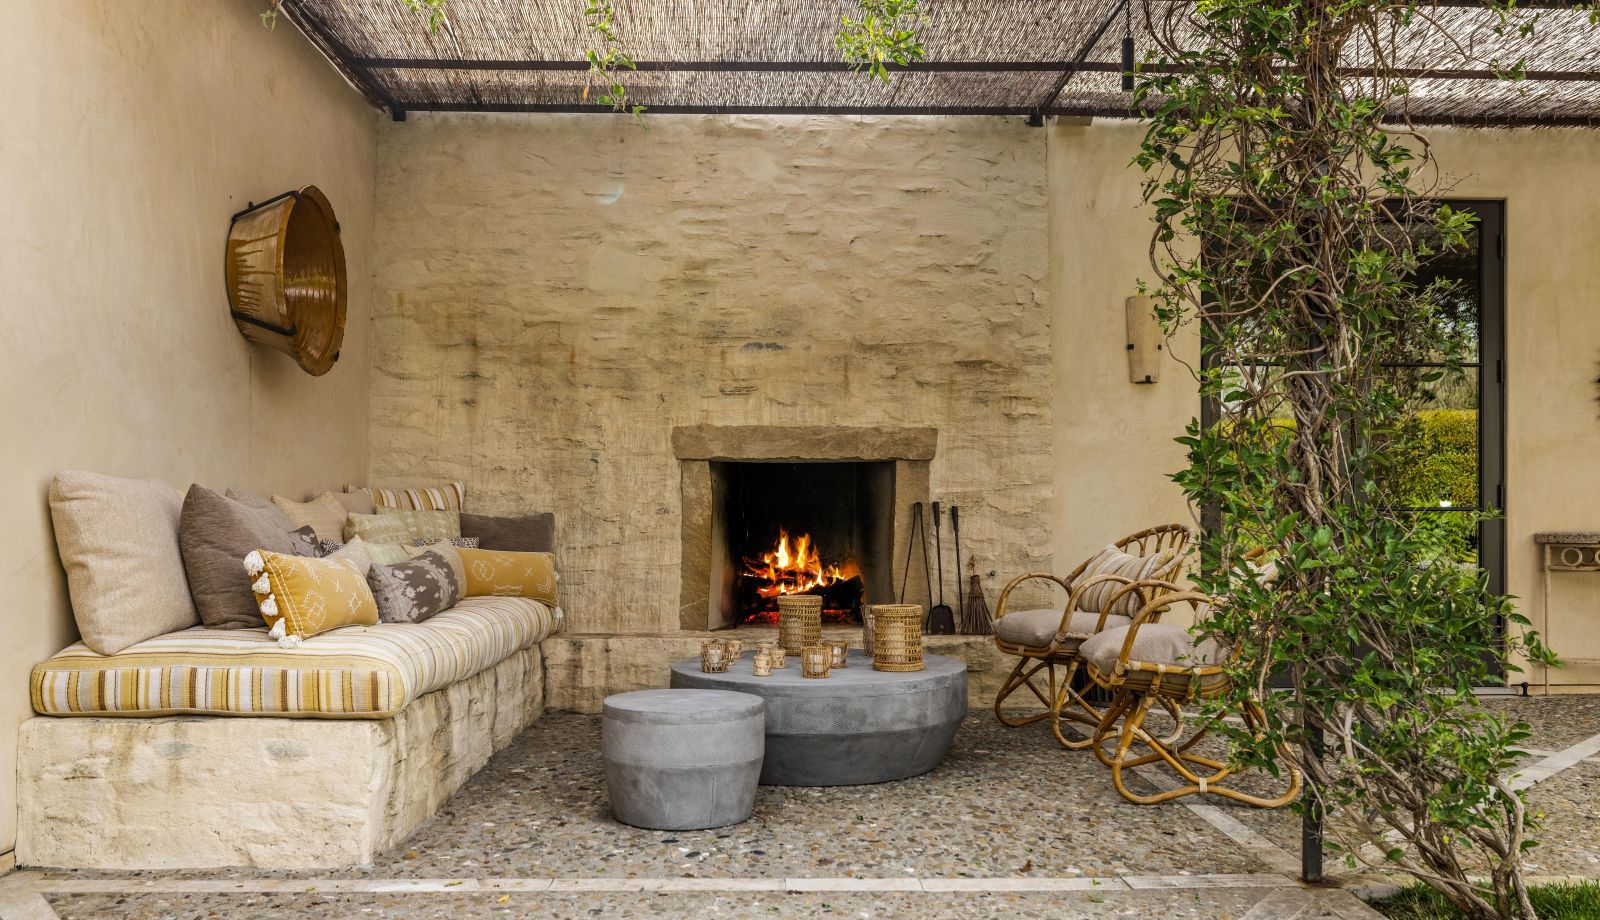 A banquette with a rustic fireplace, rattan chairs, and climbing plant under a pergola